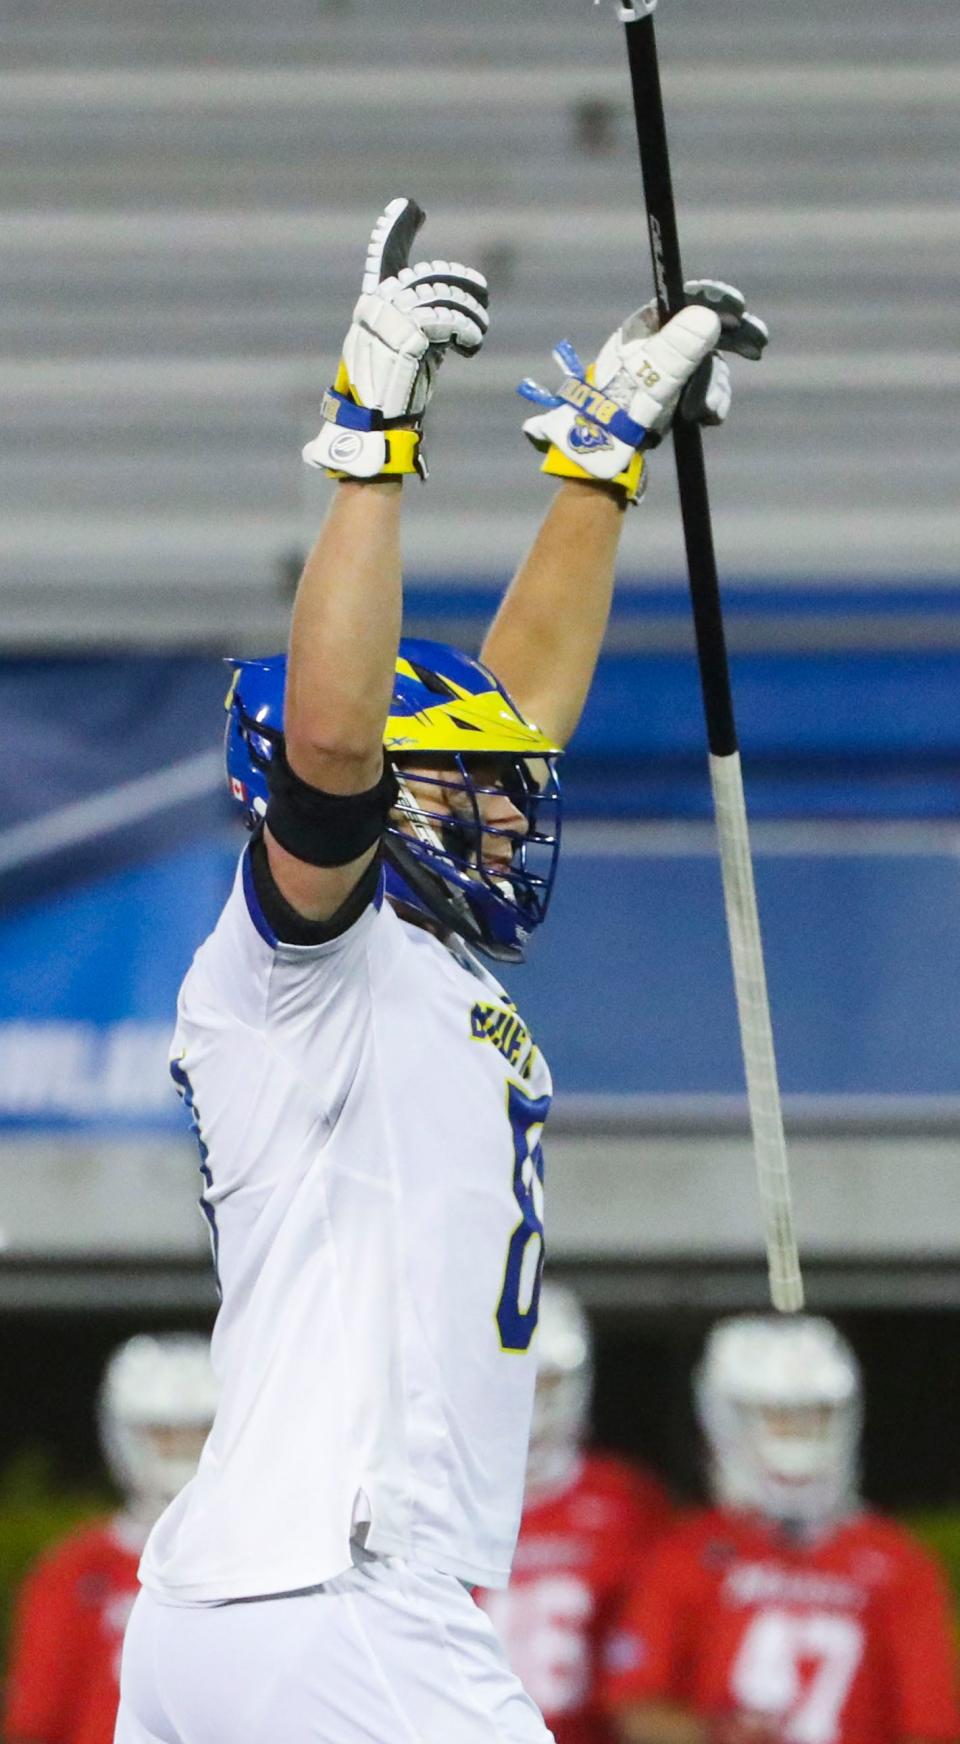 Delaware's Owen Grant reacts after assisting on a score during the second half of Delaware's 25-10 win against Marist in the opening round of the NCAA Division I lacrosse championship at Delaware Stadium, Wednesday, May 10, 2023.